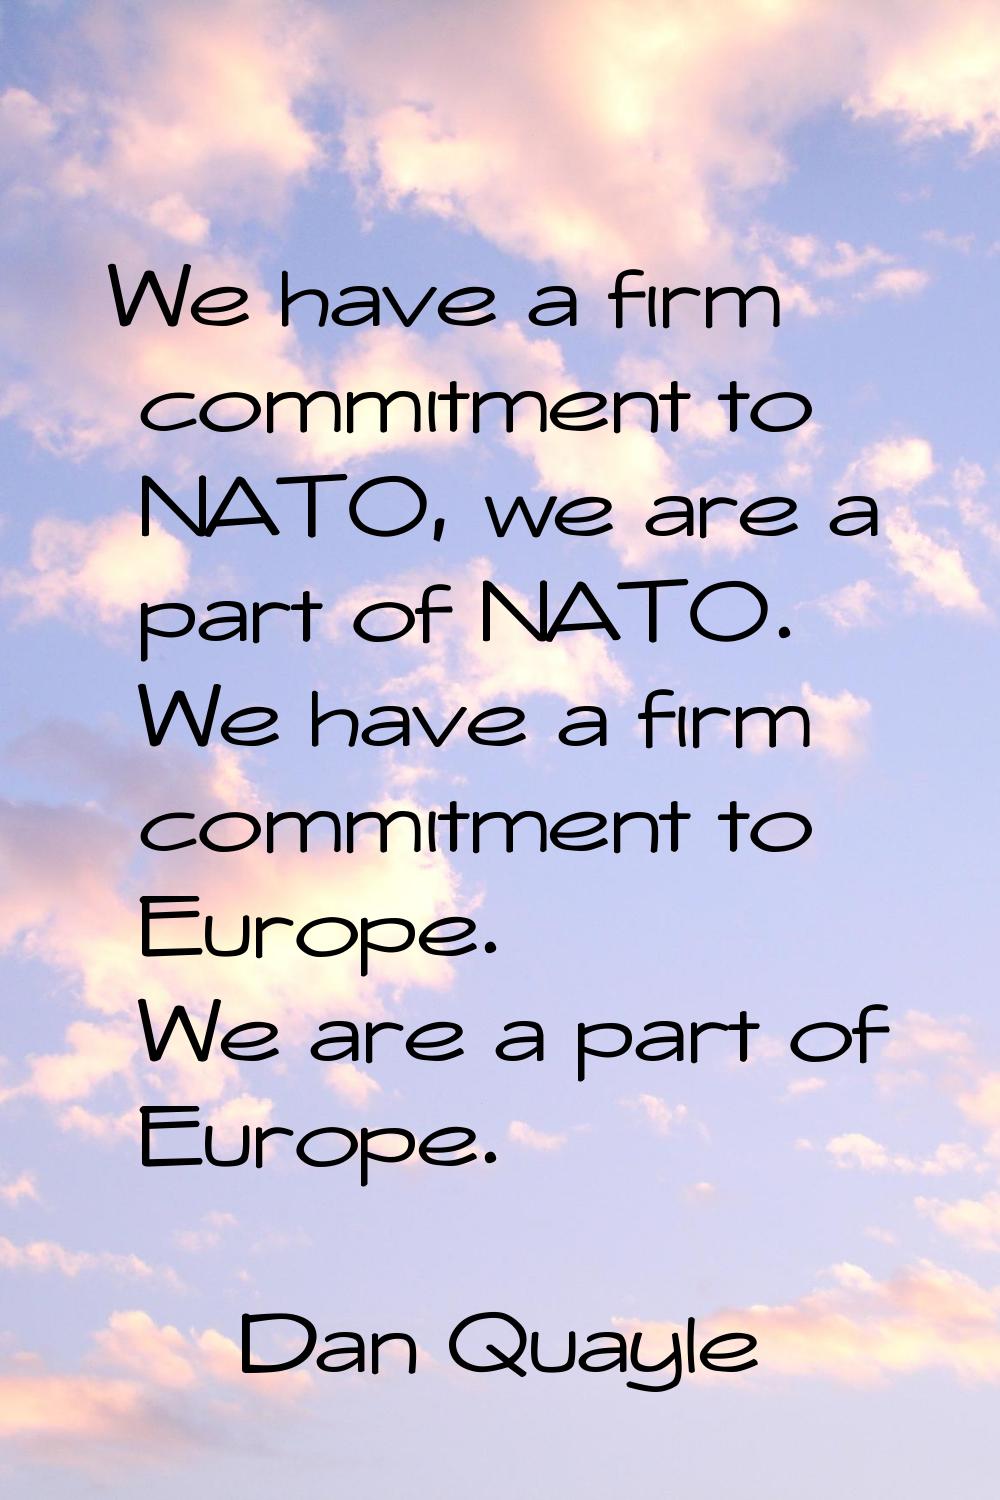 We have a firm commitment to NATO, we are a part of NATO. We have a firm commitment to Europe. We a